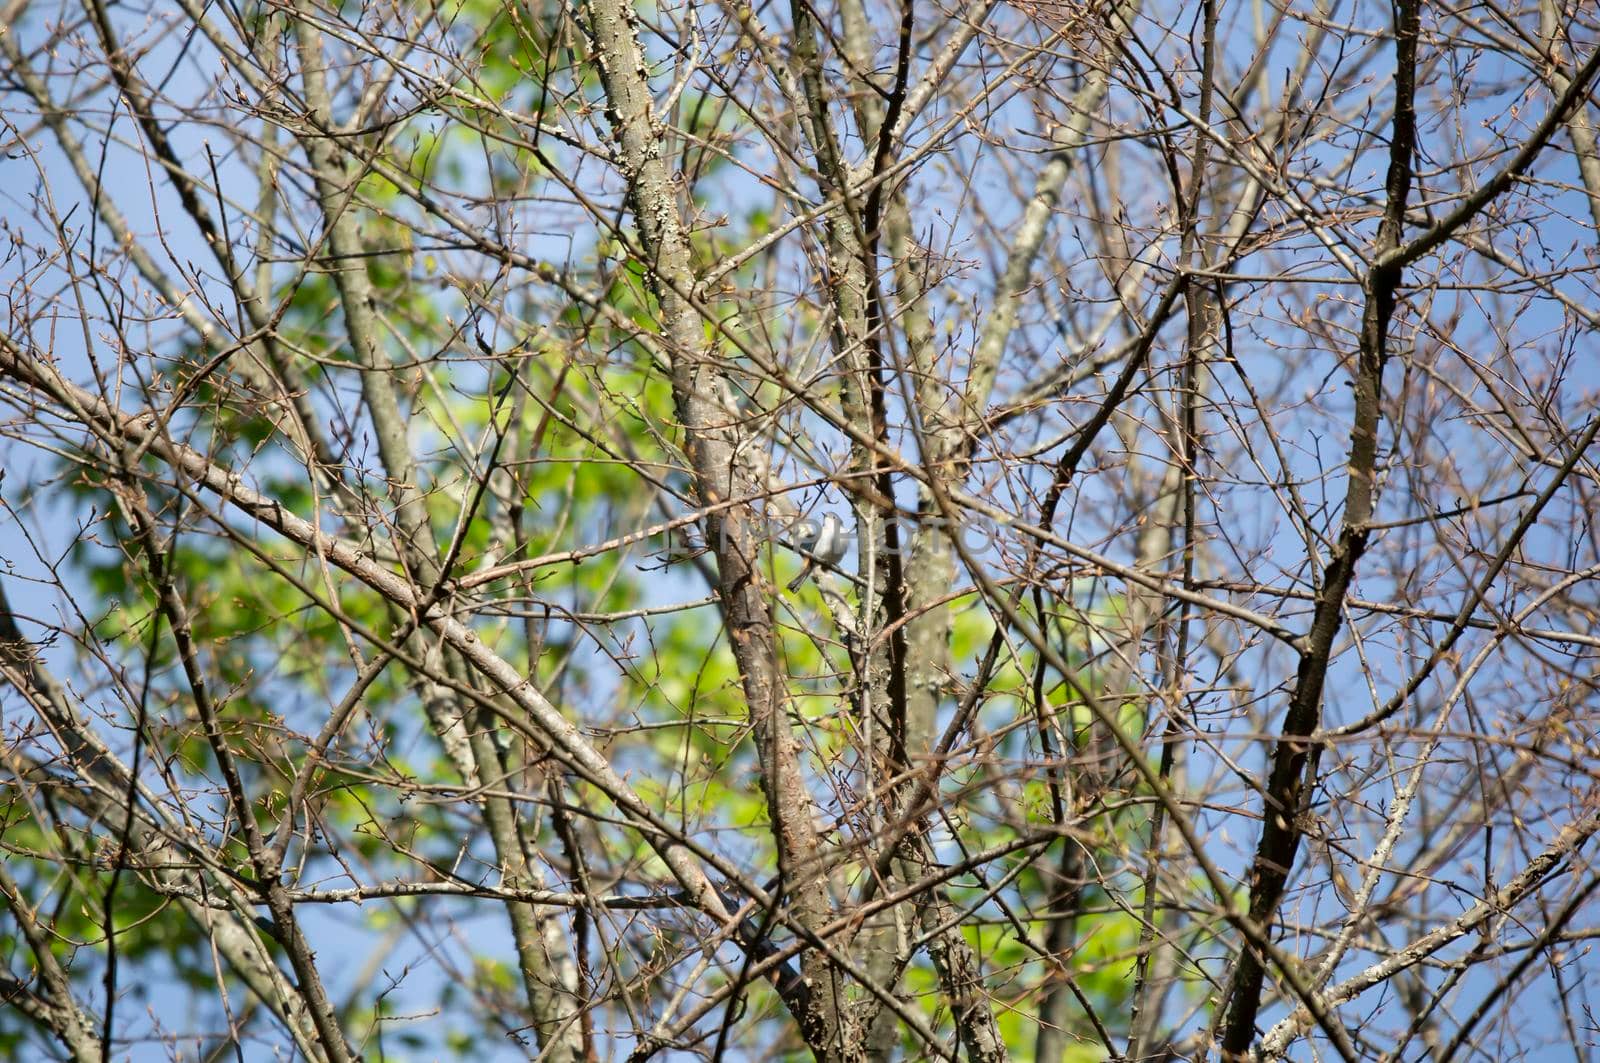 Curious blue-gray gnatcatcher (Polioptila caerulea) looking around majestically from a tree branch on a pretty day